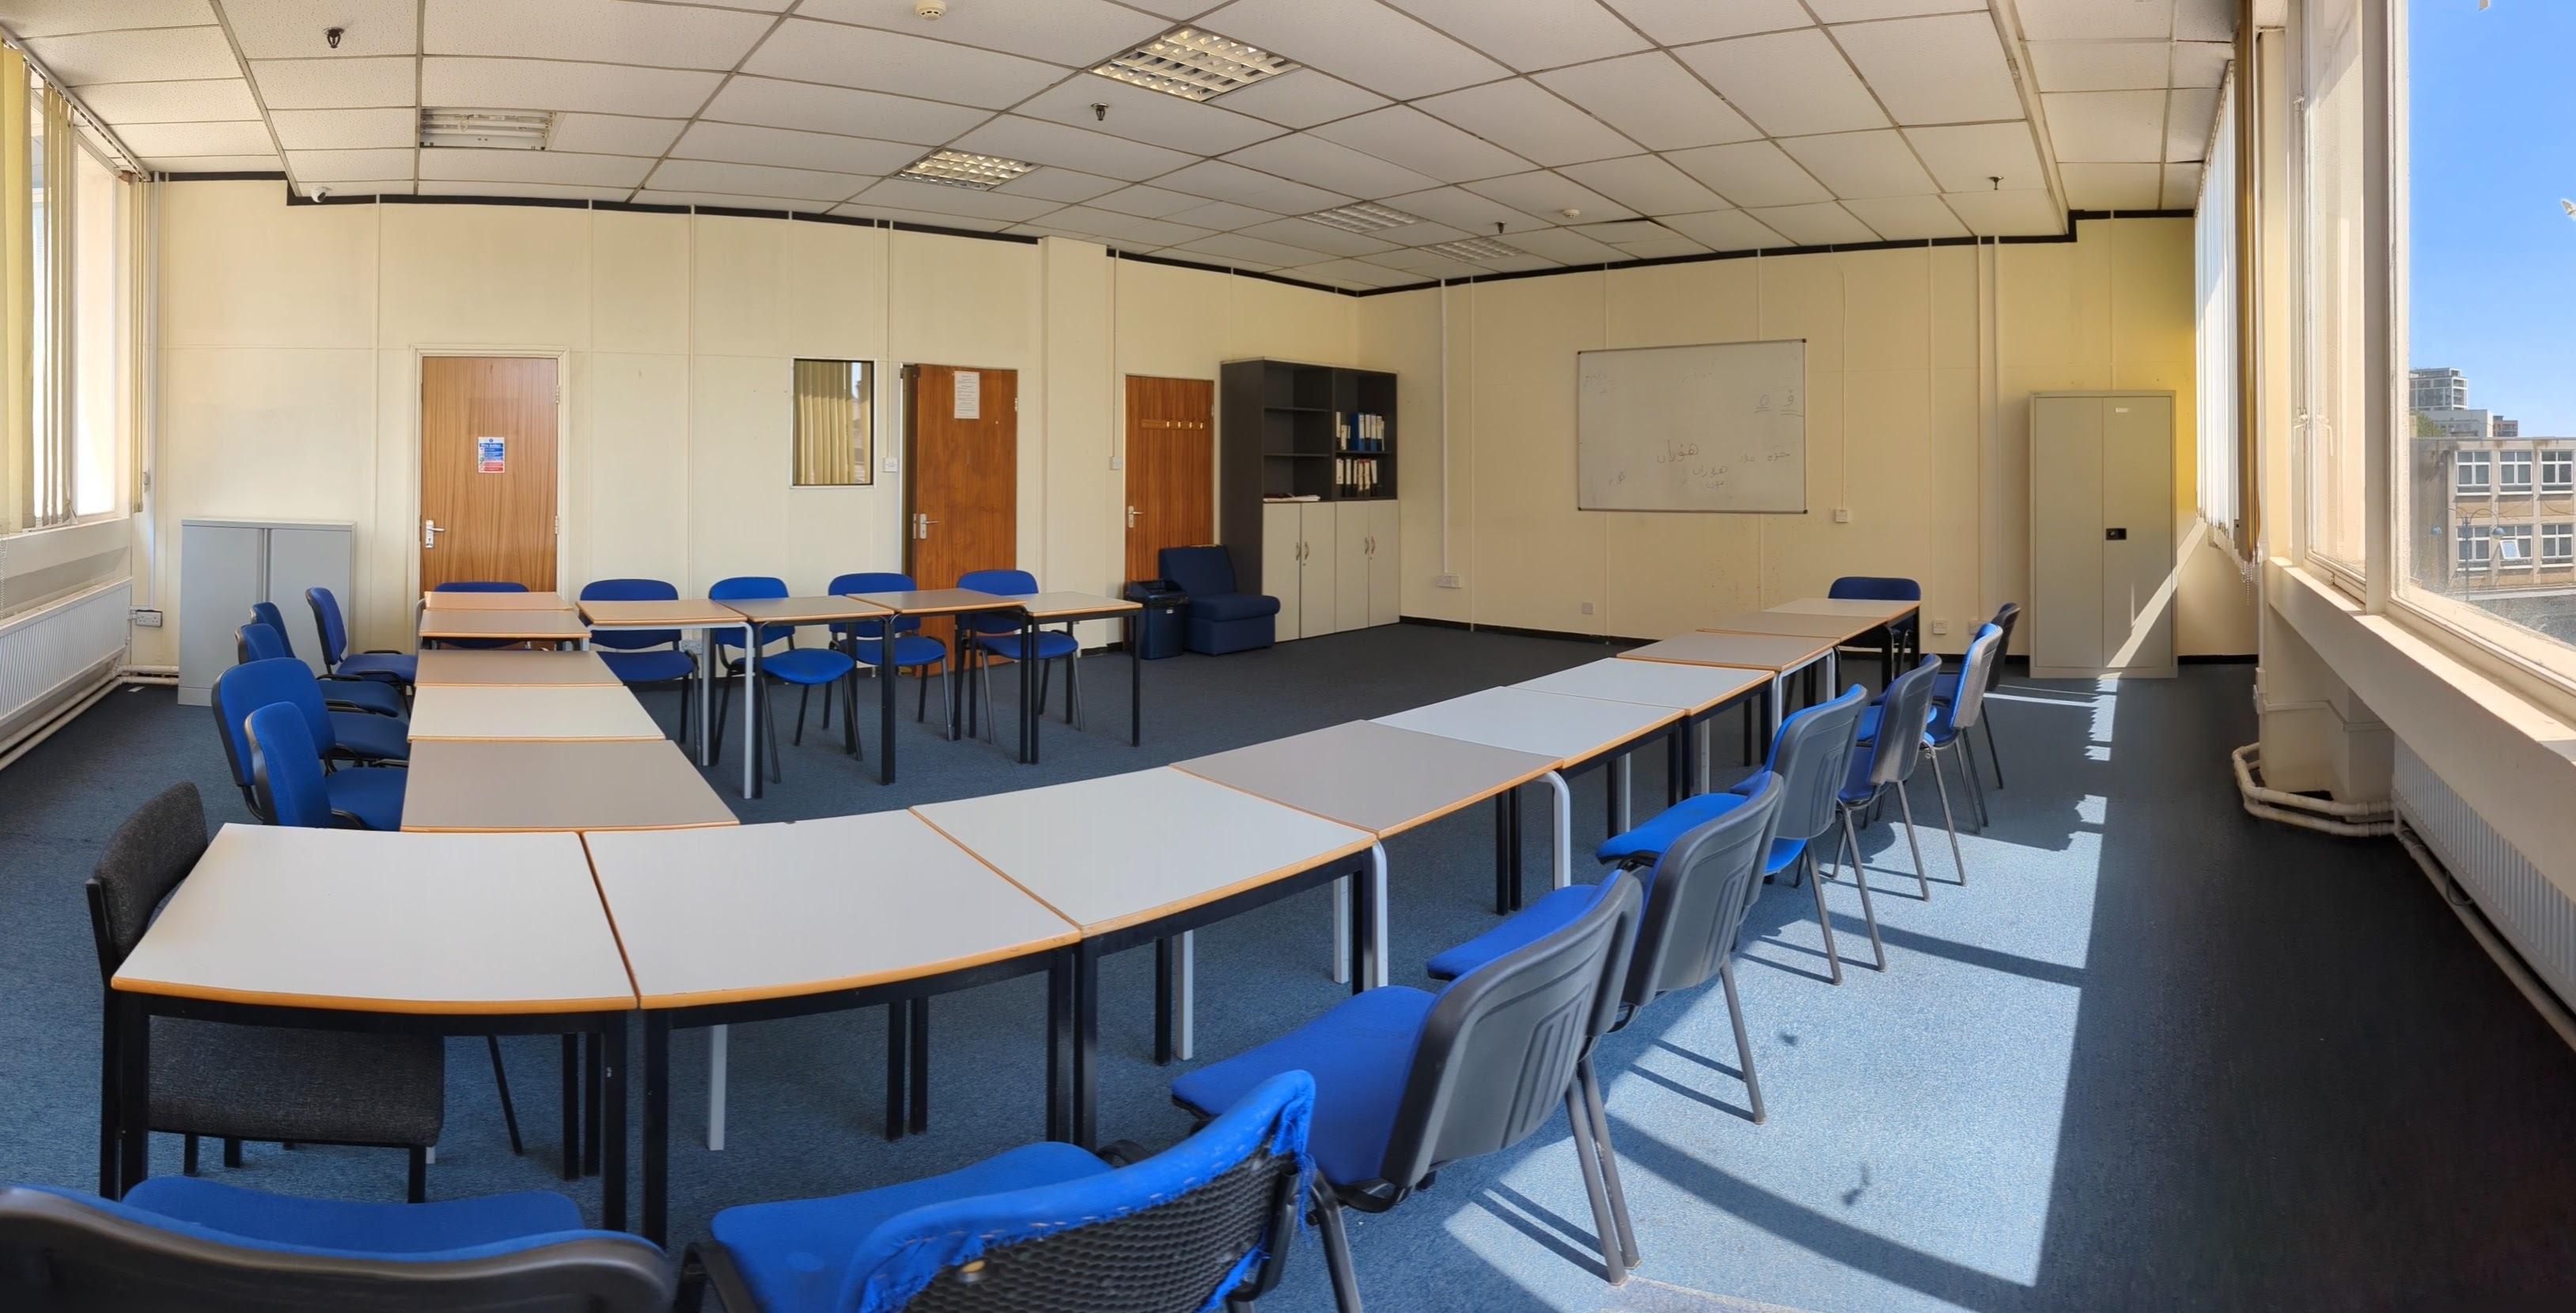 The Woolwich College, Classroom photo #3